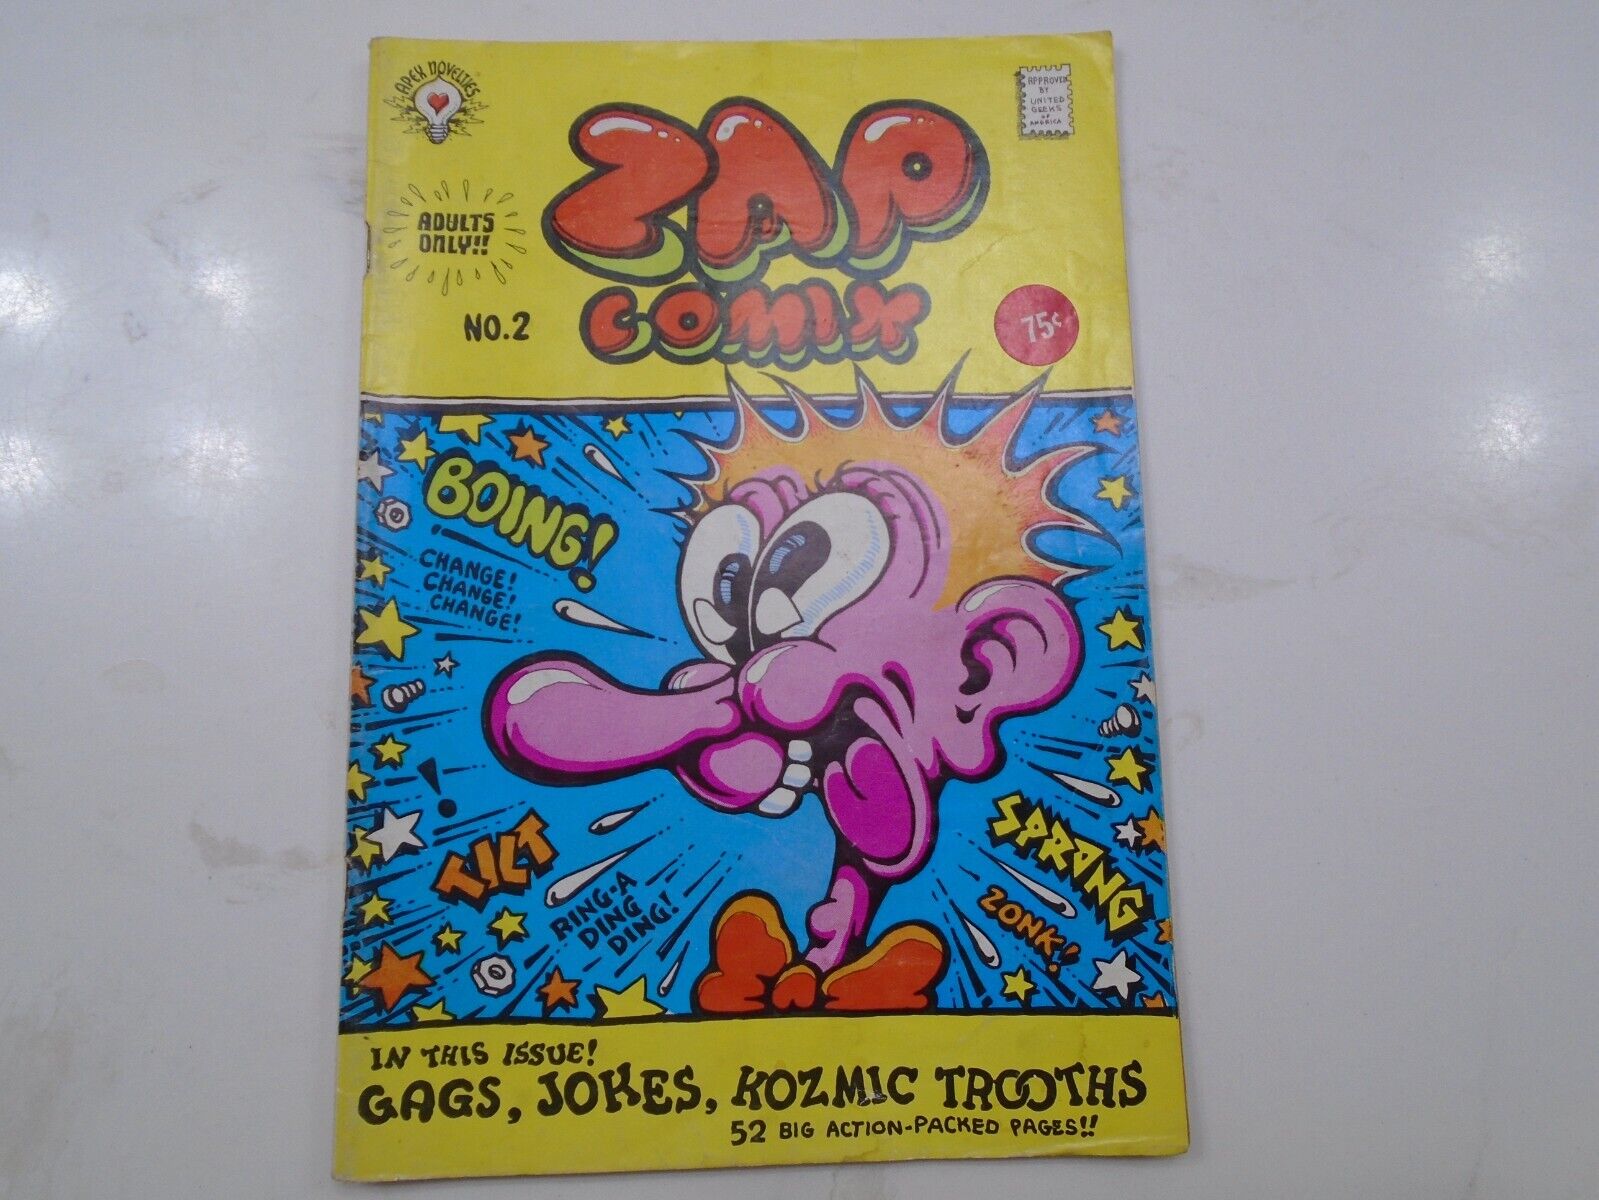 Zap Comix #2 (1968), #4 (1969), #6 (1973), and #7 (1974). COUNTER CULTURE